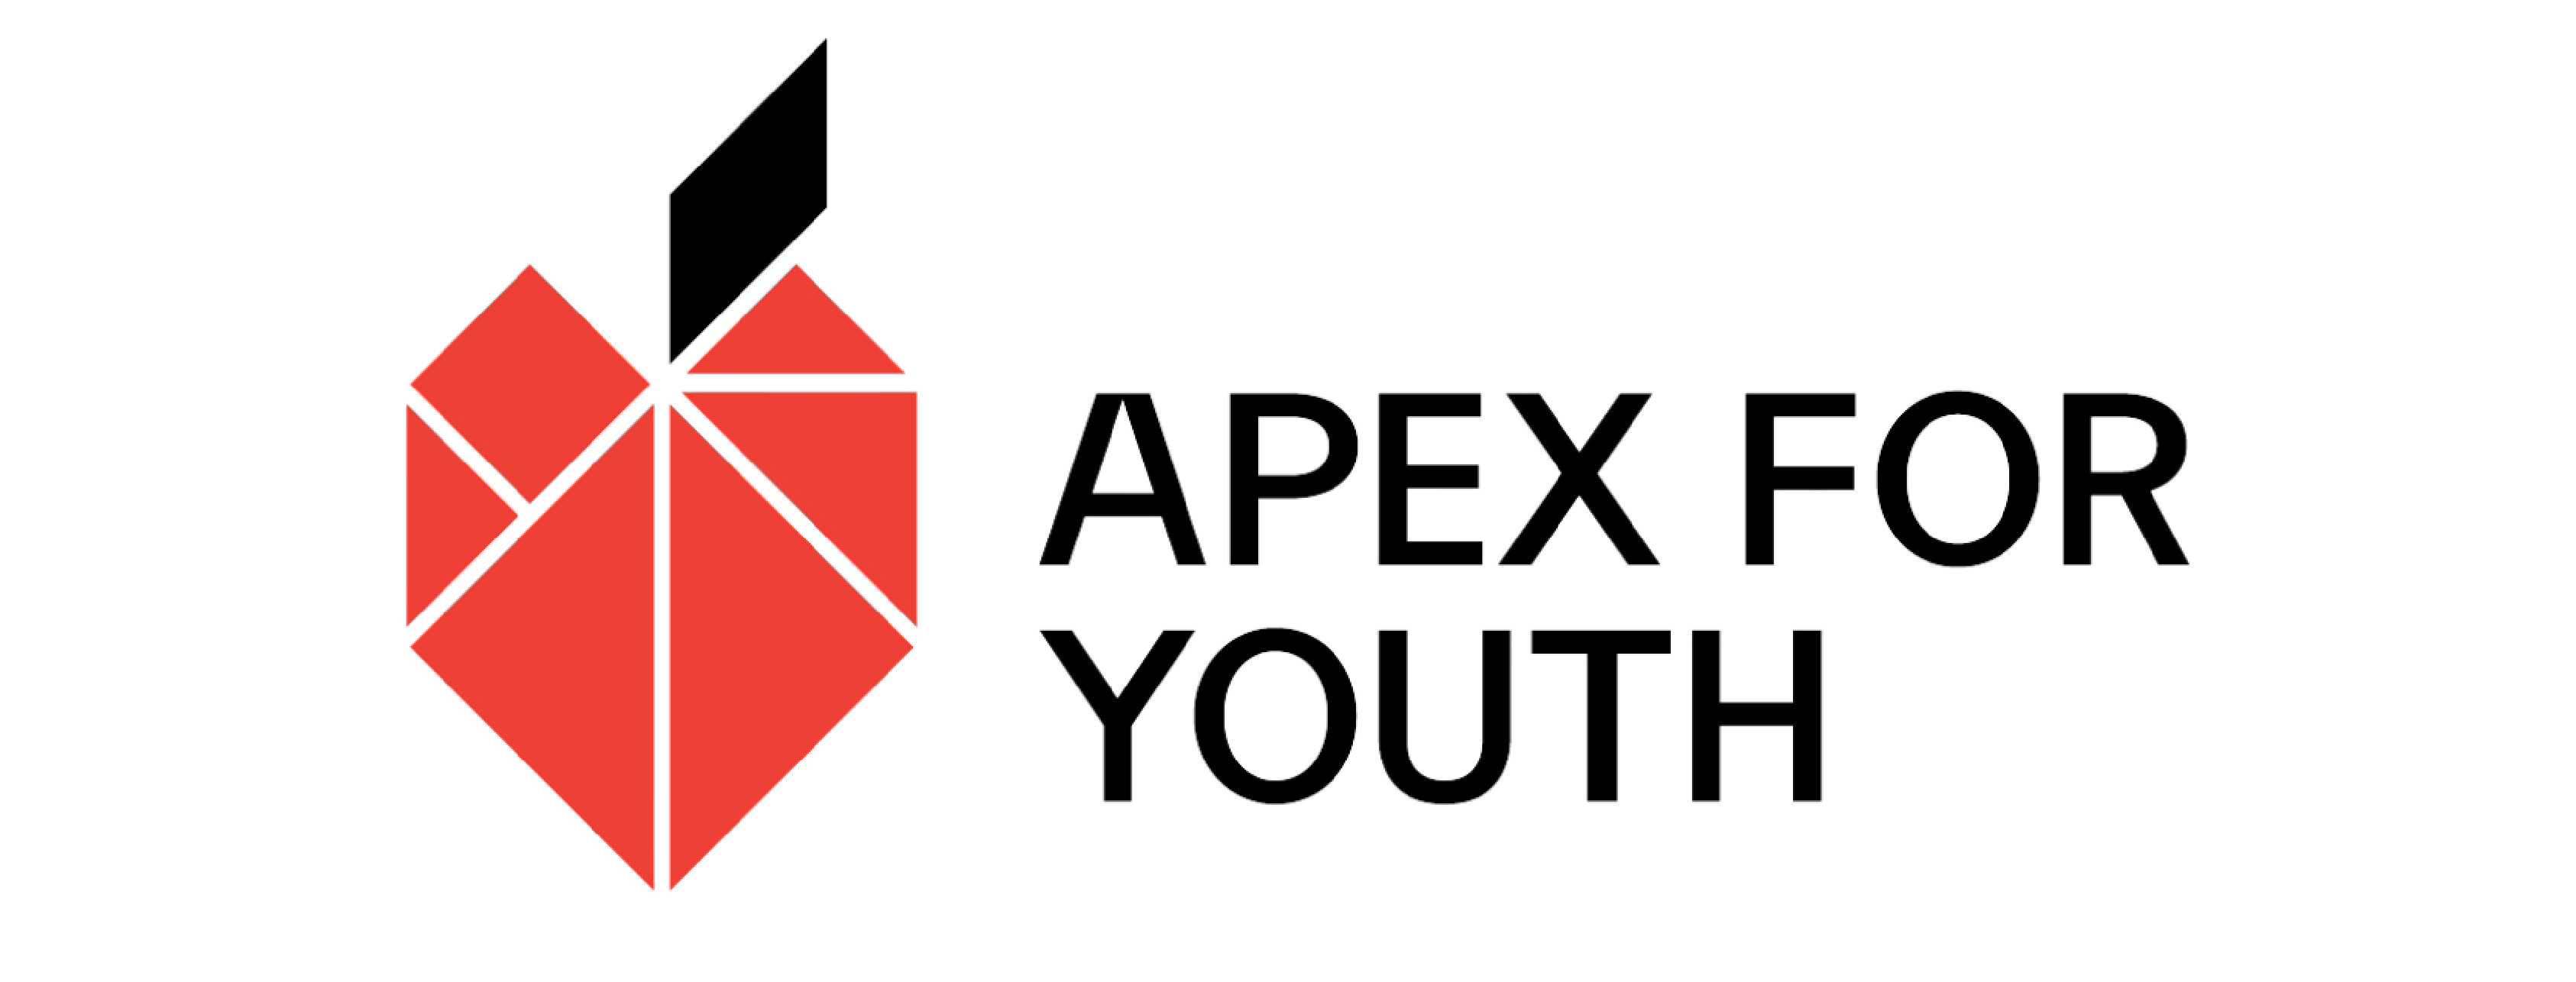 Apex for Youth logo